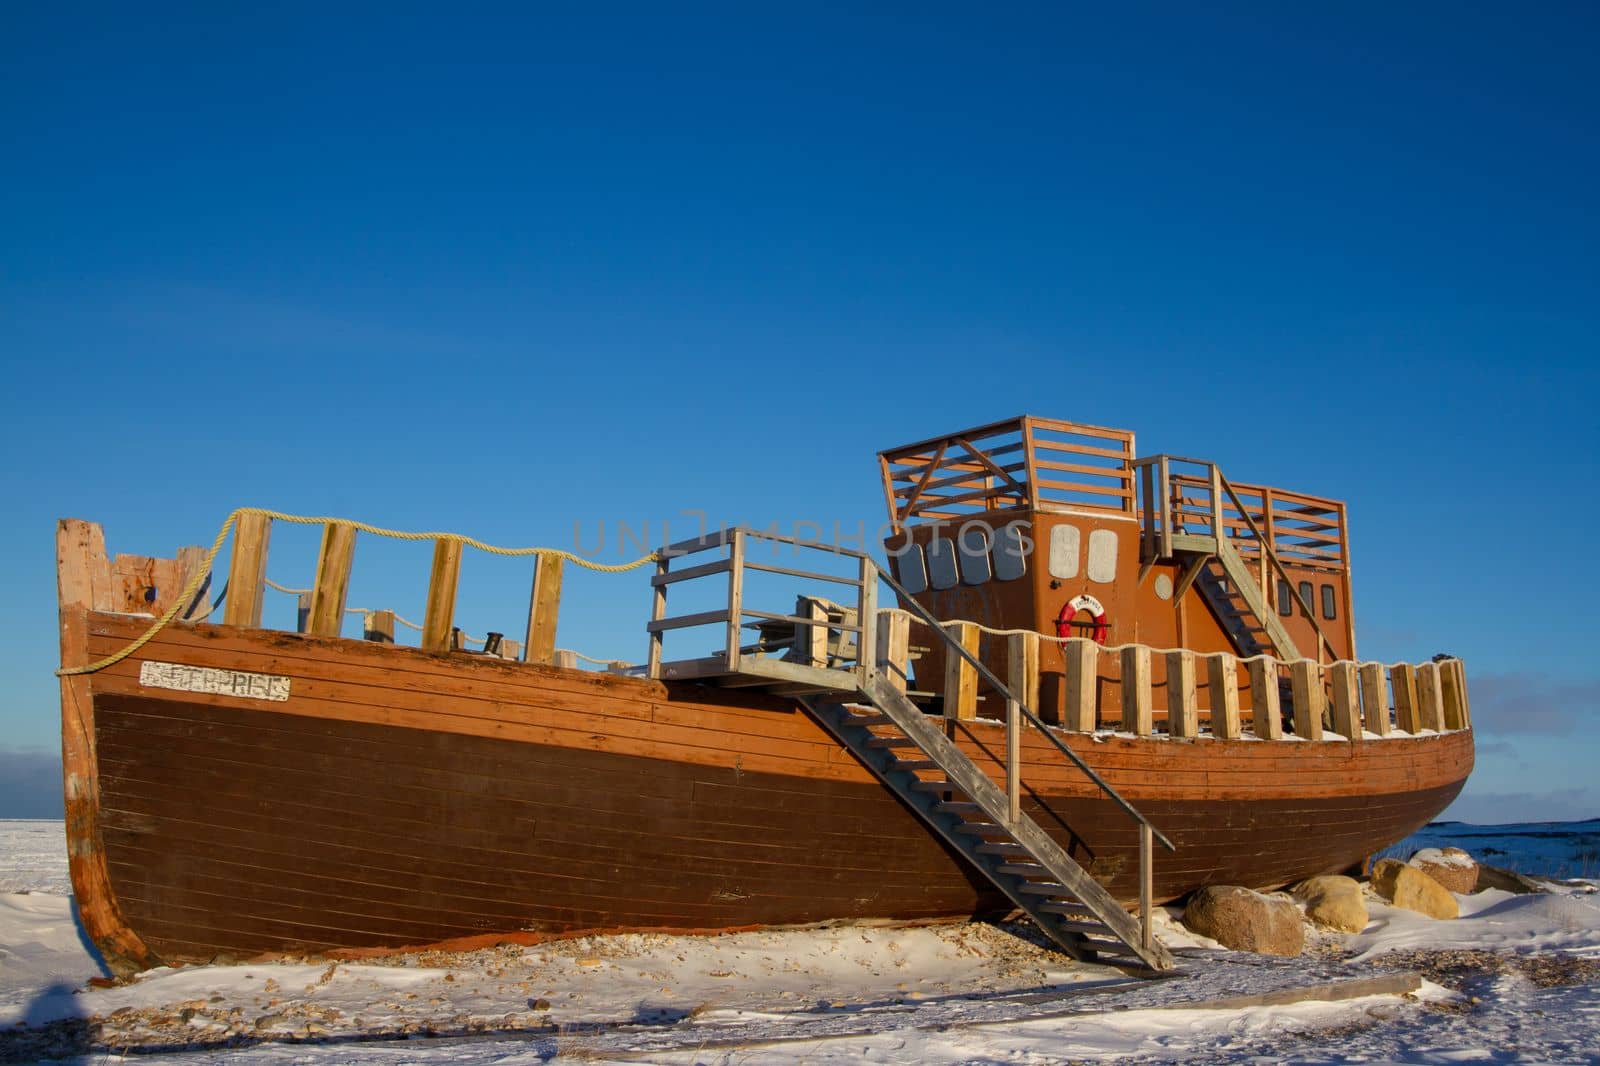 Dutch vessel, the Enterprise, a wooden boat out of the water and turned into a public tourist attraction on the Hudson Bay shore in Churchill, Manitoba, Canada